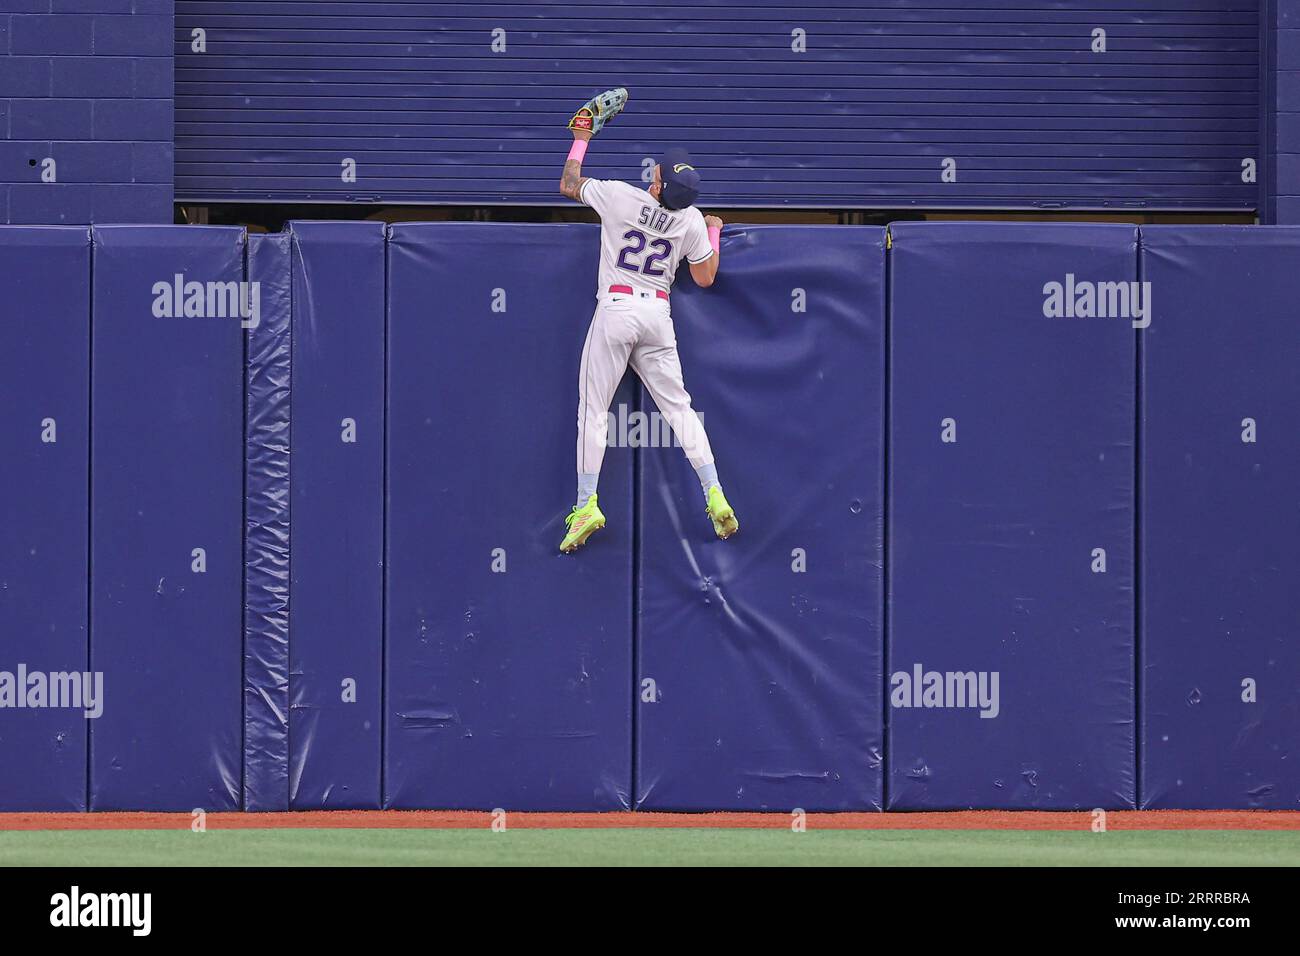 St. Petersburg, FL USA; Tampa Bay Rays center fielder Jose Siri (22) climbs the walls trying to catch a home run ball off the bat of Seattle Mariners Stock Photo